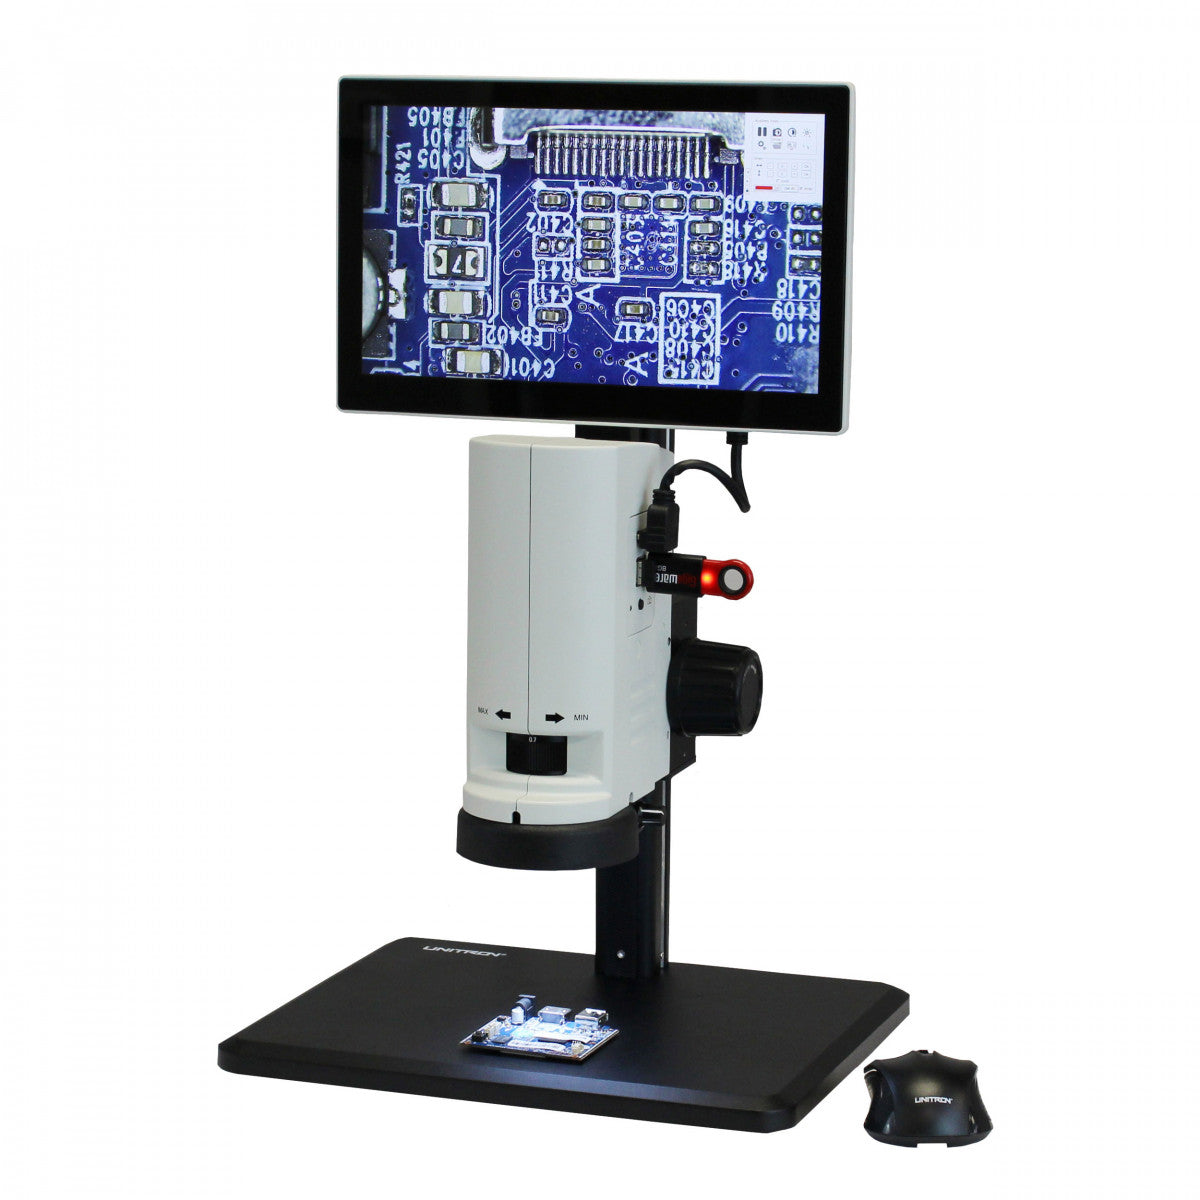 ZoomHD with Monitor on Track Stand - microscopemarketplace